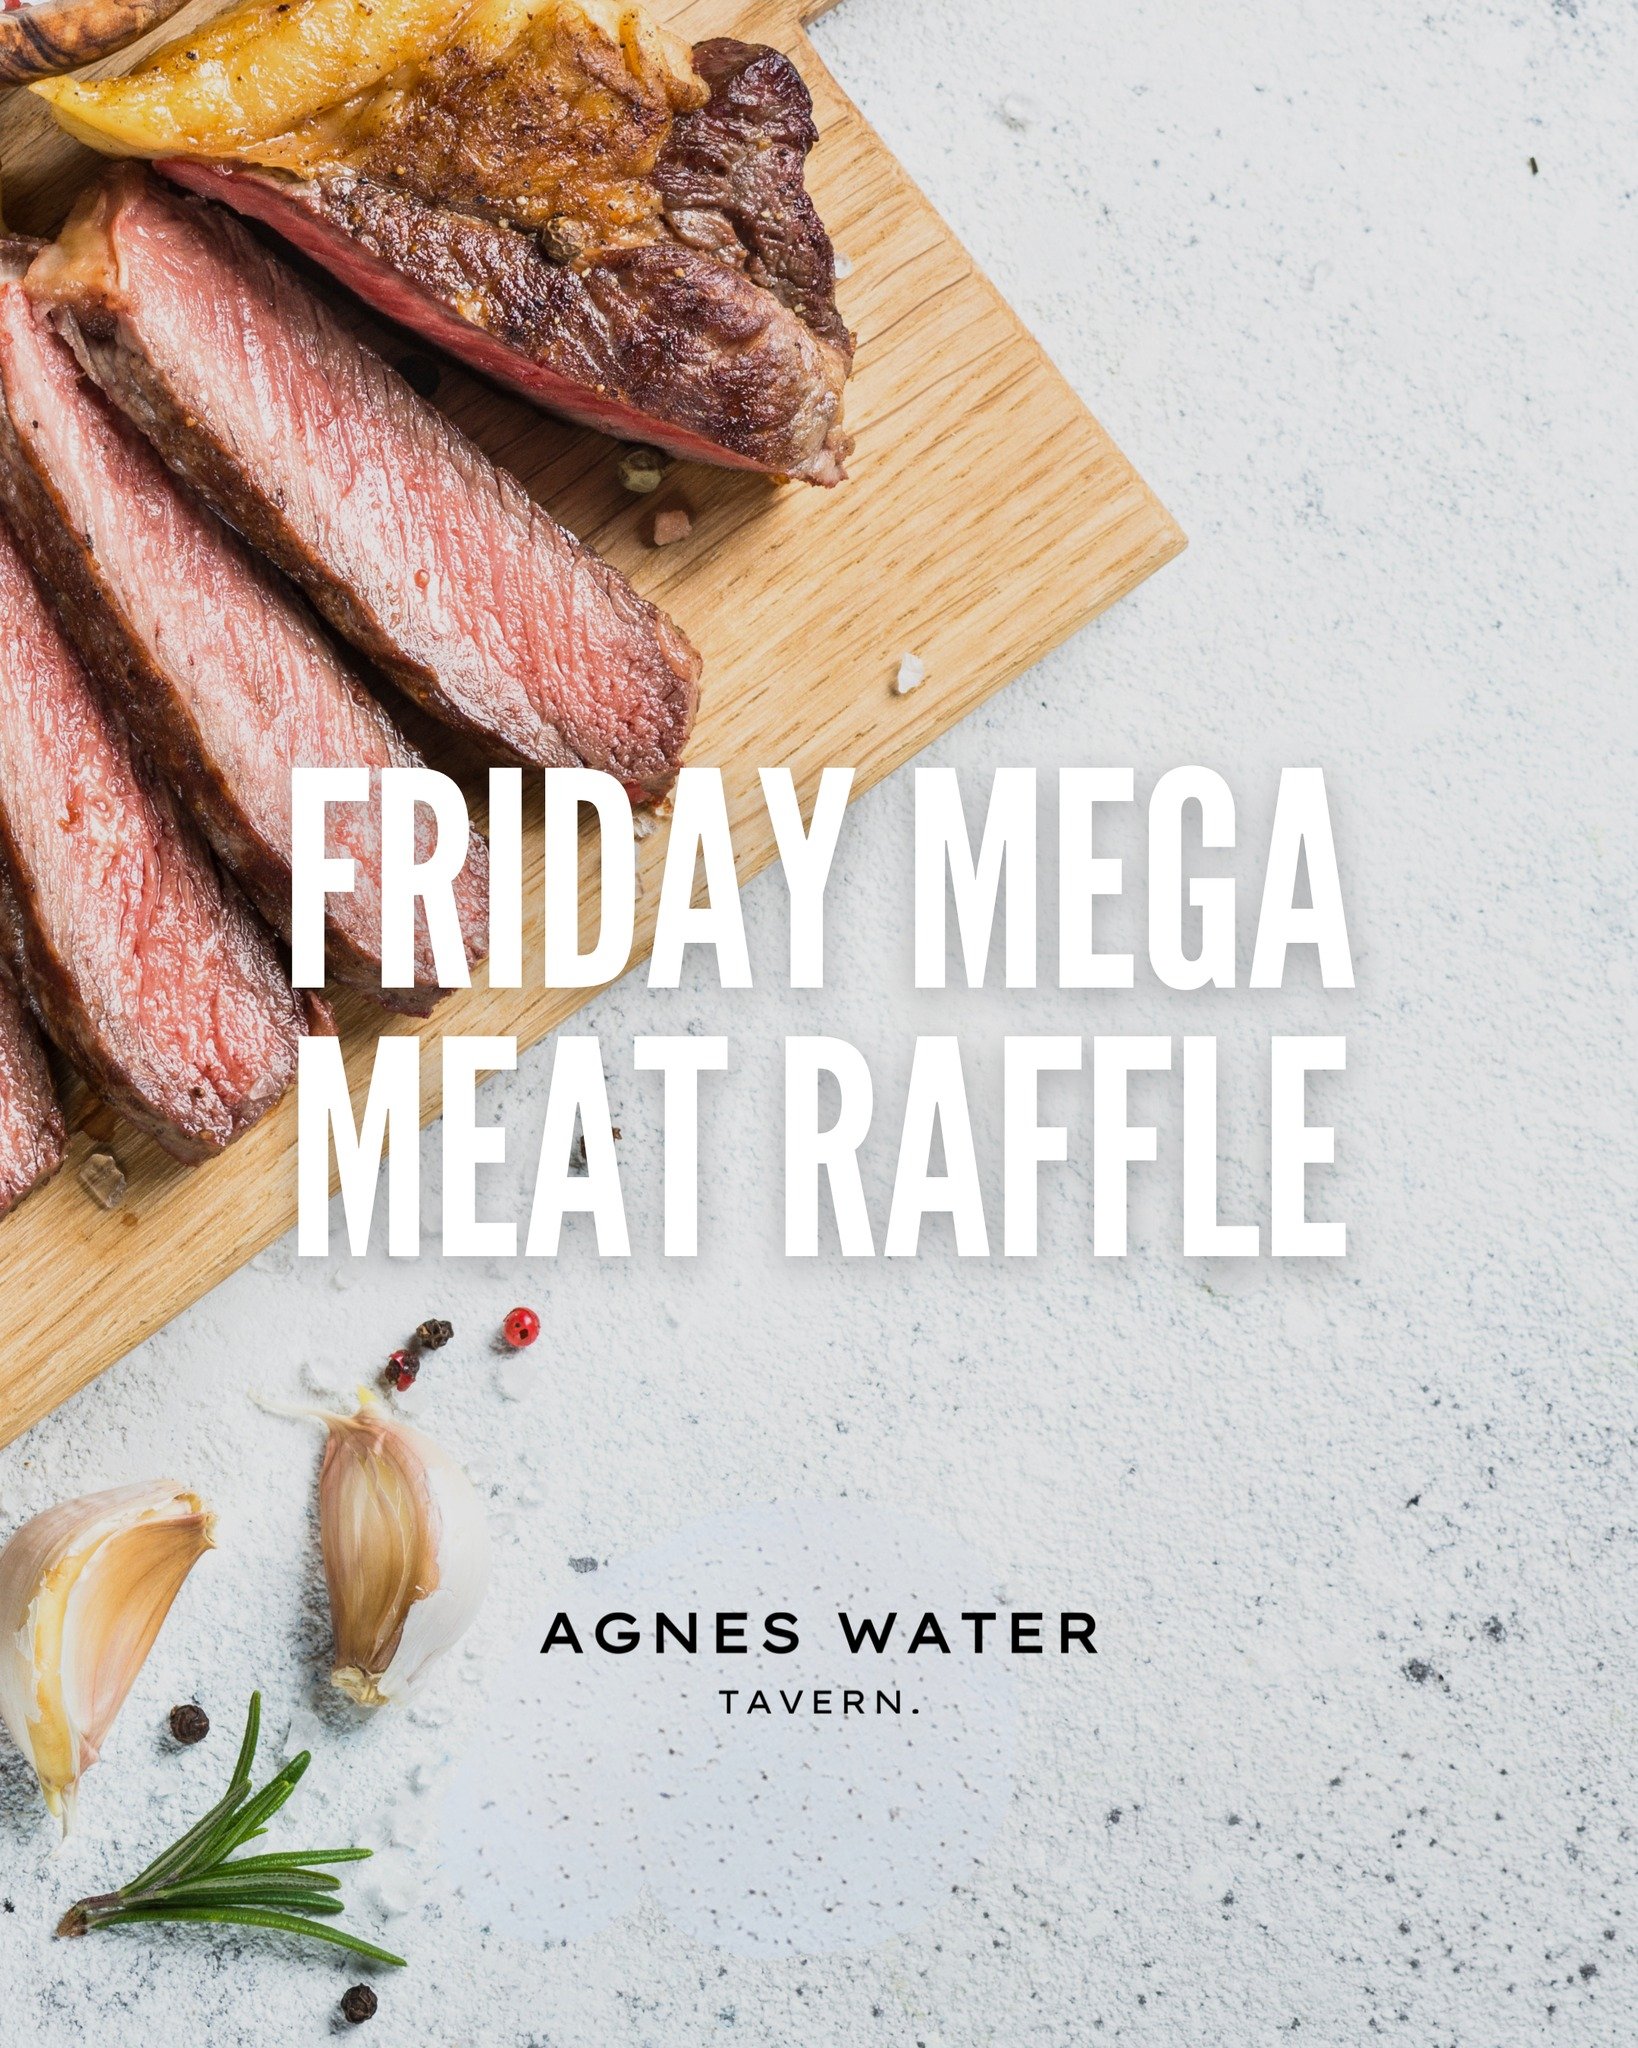 🥩🥓 𝗪𝗜𝗡 𝗮 𝗠𝗘𝗔𝗧 𝗧𝗥𝗔𝗬 𝘁𝗵𝗶𝘀 𝗙𝗿𝗶𝗱𝗮𝘆

Join us every Friday for a chance to win mouthwatering meat tray in our exciting raffles, supporting our RSL.

⏰ 𝗦𝘁𝗮𝗿𝘁𝘀 𝟲𝗽𝗺

𝙍𝙚𝙨𝙚𝙧𝙫𝙚 𝙖 𝙏𝙖𝙗𝙡𝙚: 
🔗 https://bit.ly/AWT-BookNow